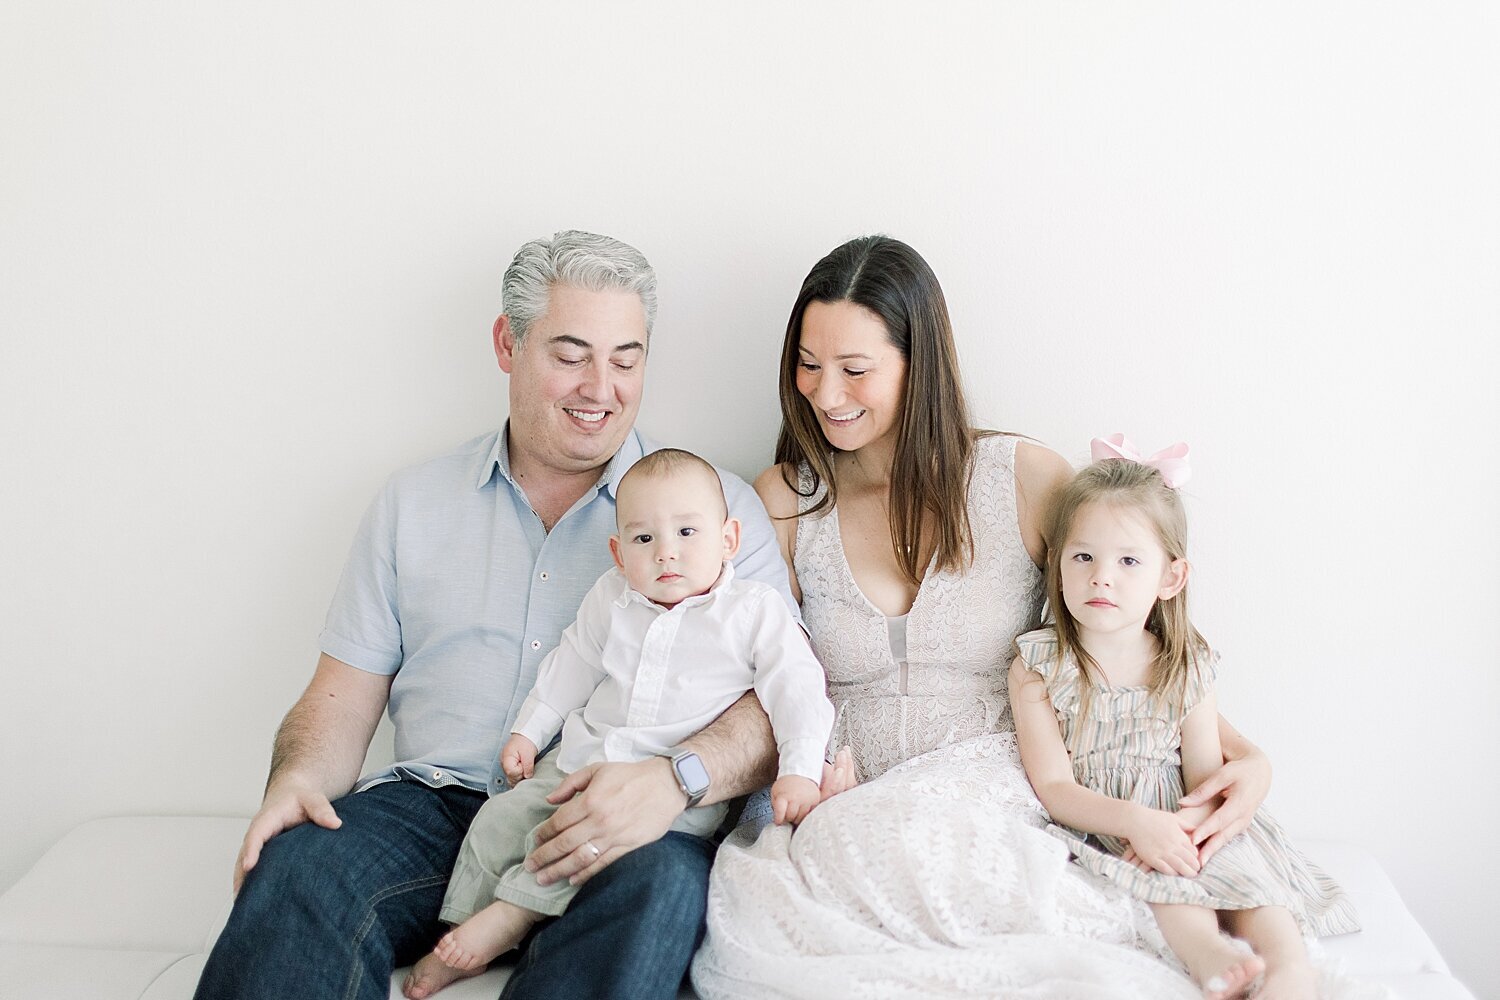 Family portrait in Newport Beach Studio during baby boy's first birthday session with Ambre Williams Photography.